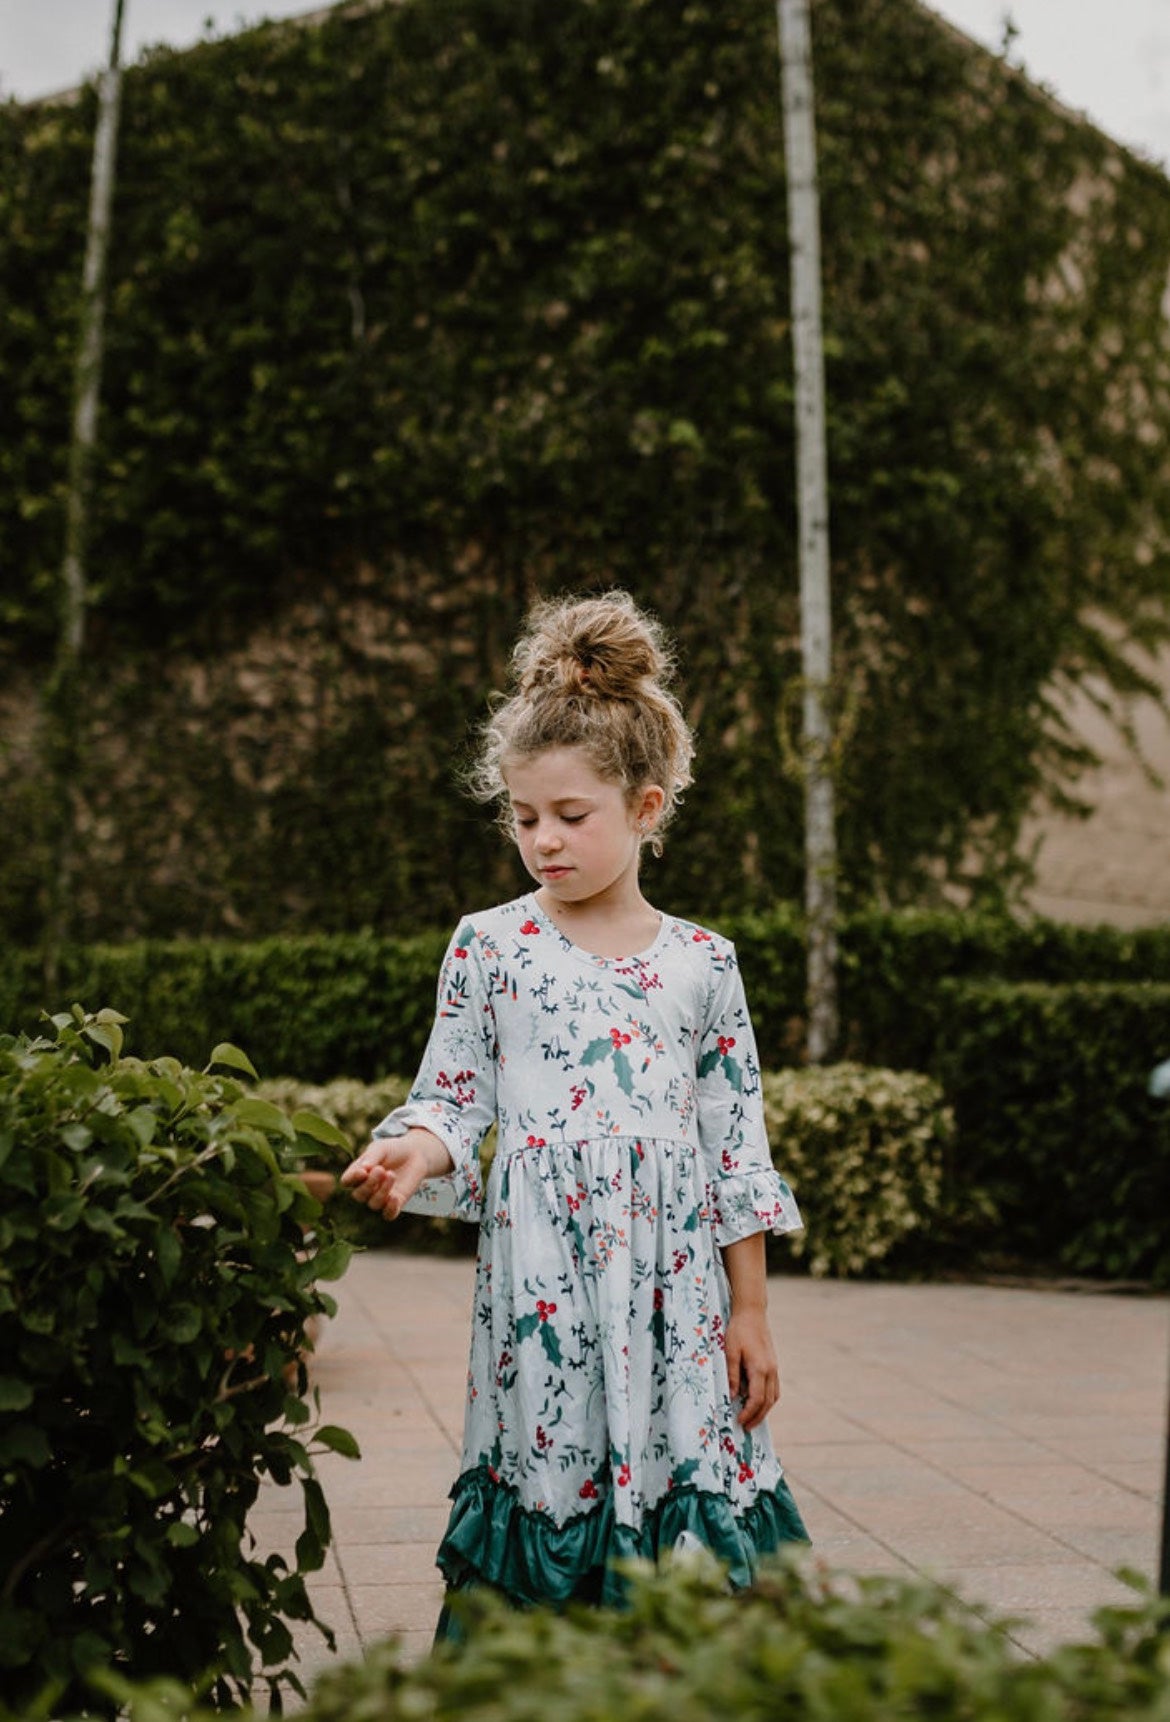 Girls Long Ruffle Holiday/Christmas Dresses - Winter Blue with Plants & Holly